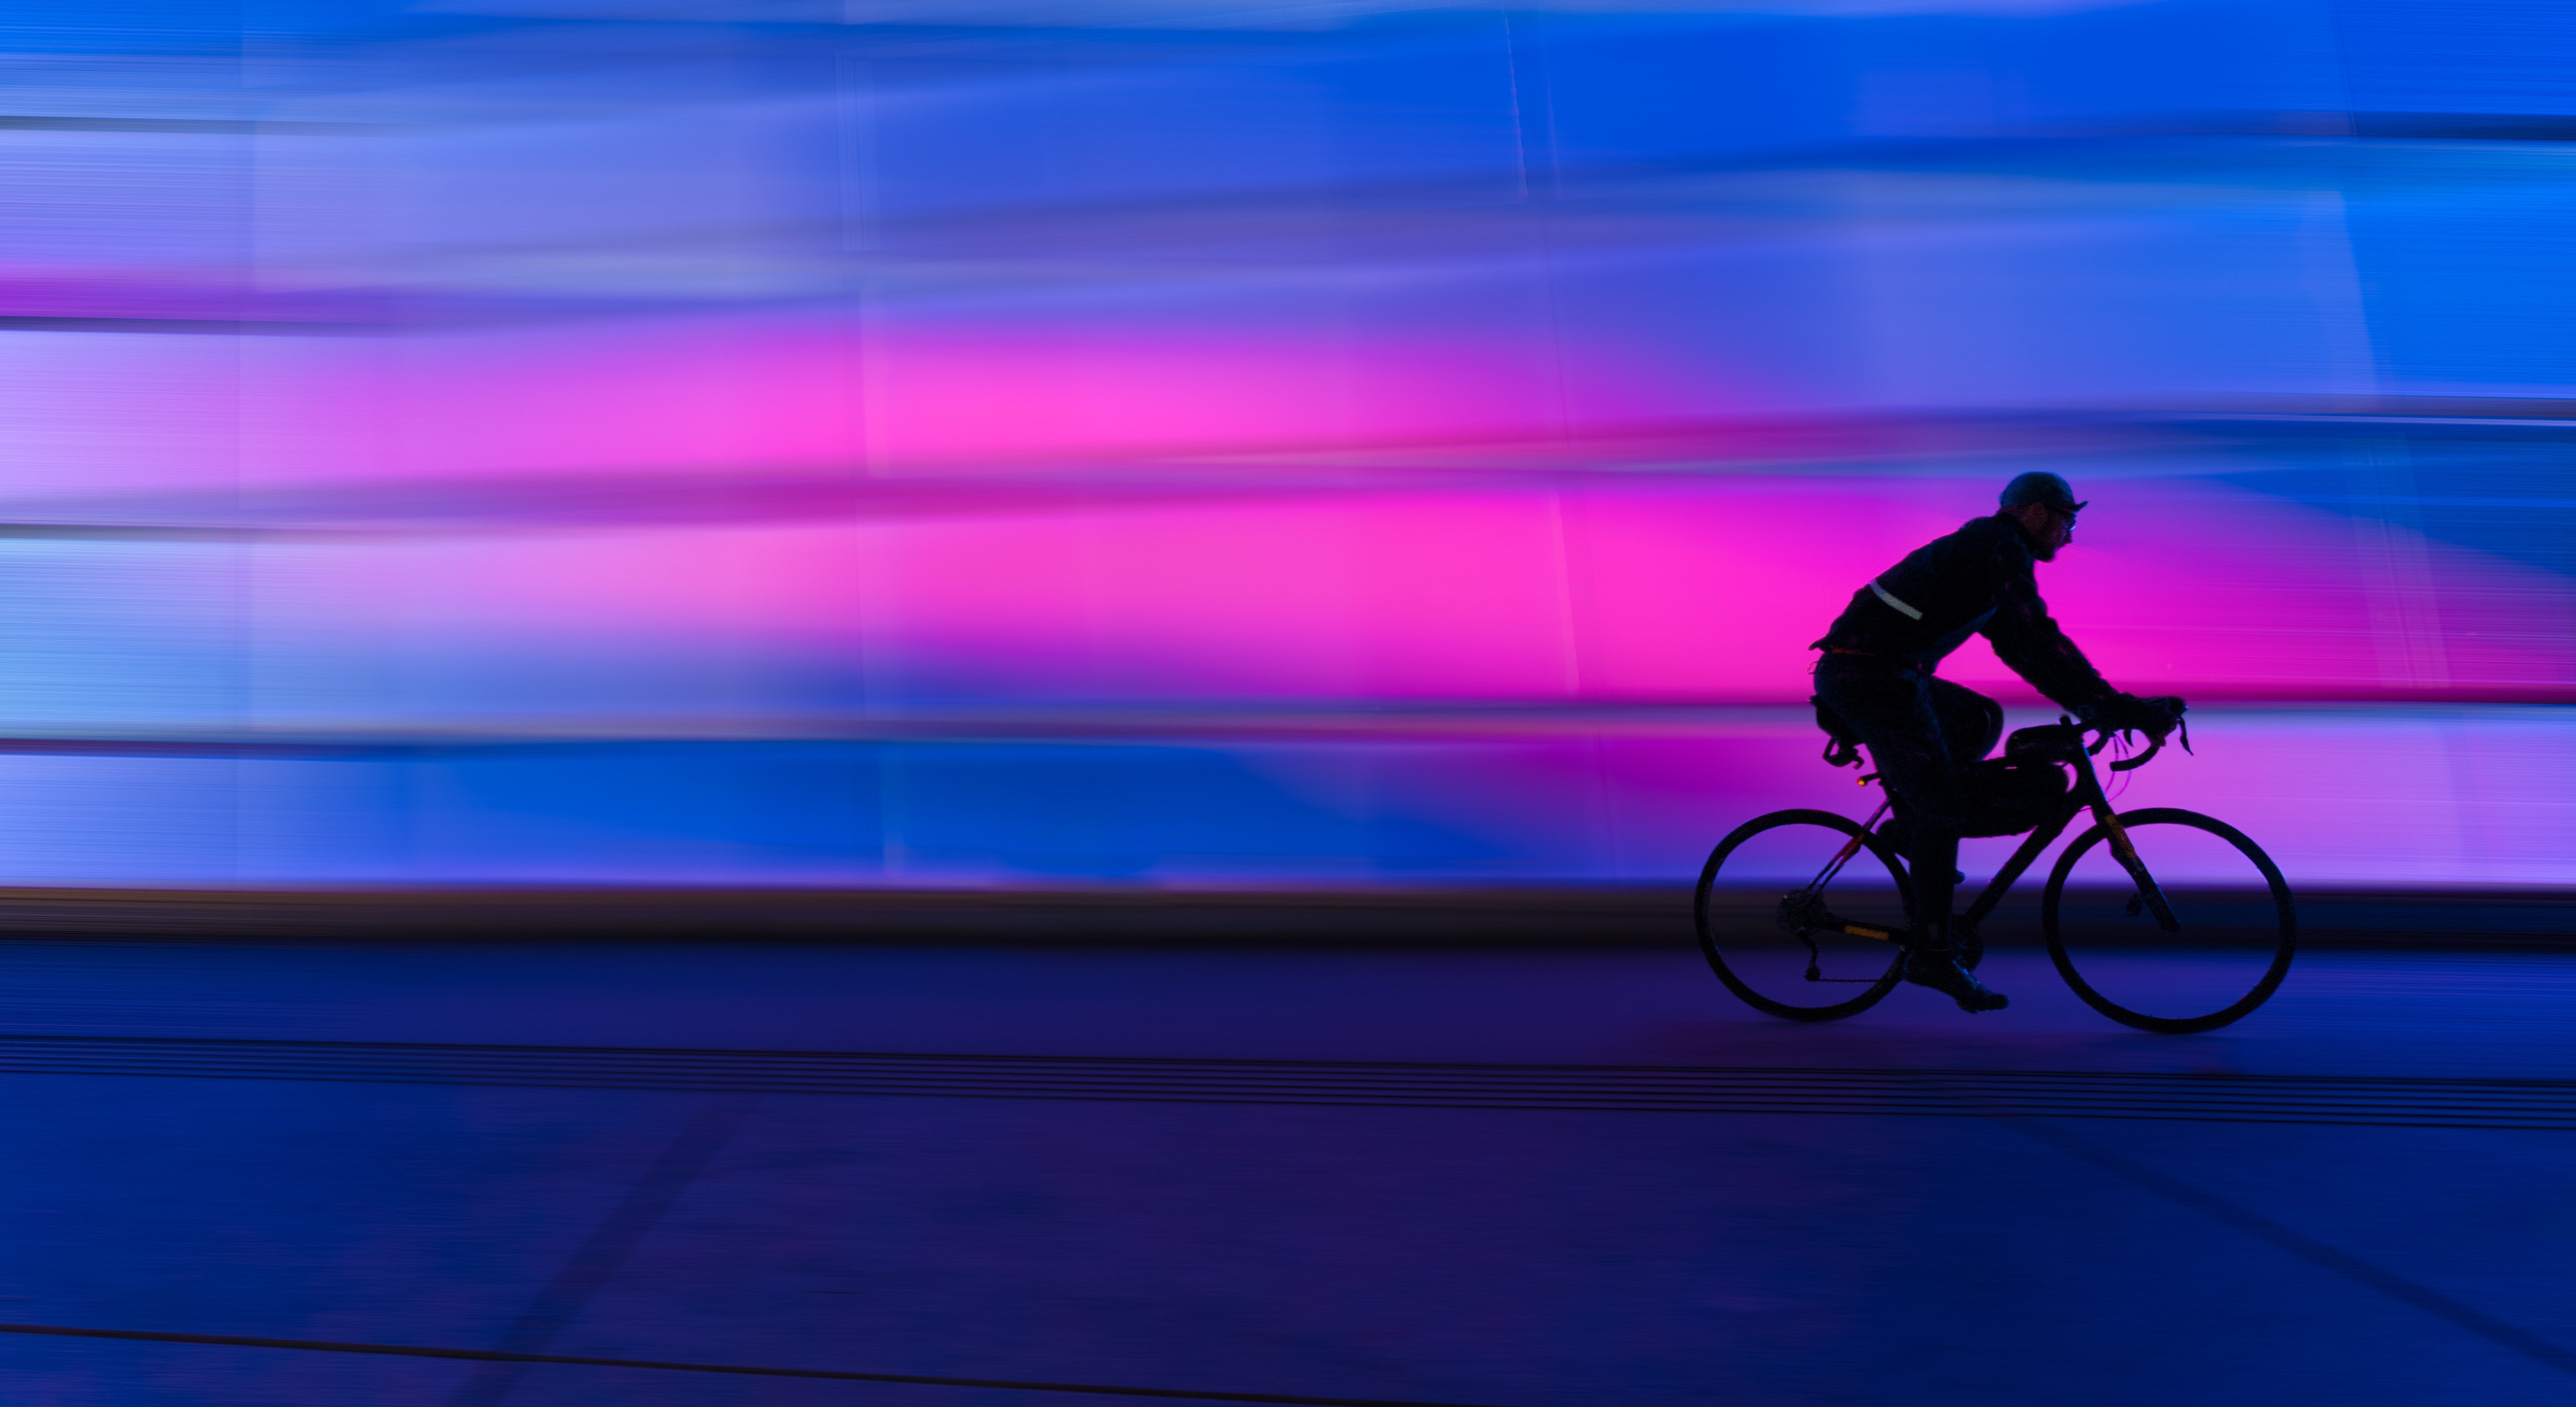 silhouette of a person riding a bike with a neon blue and pink background